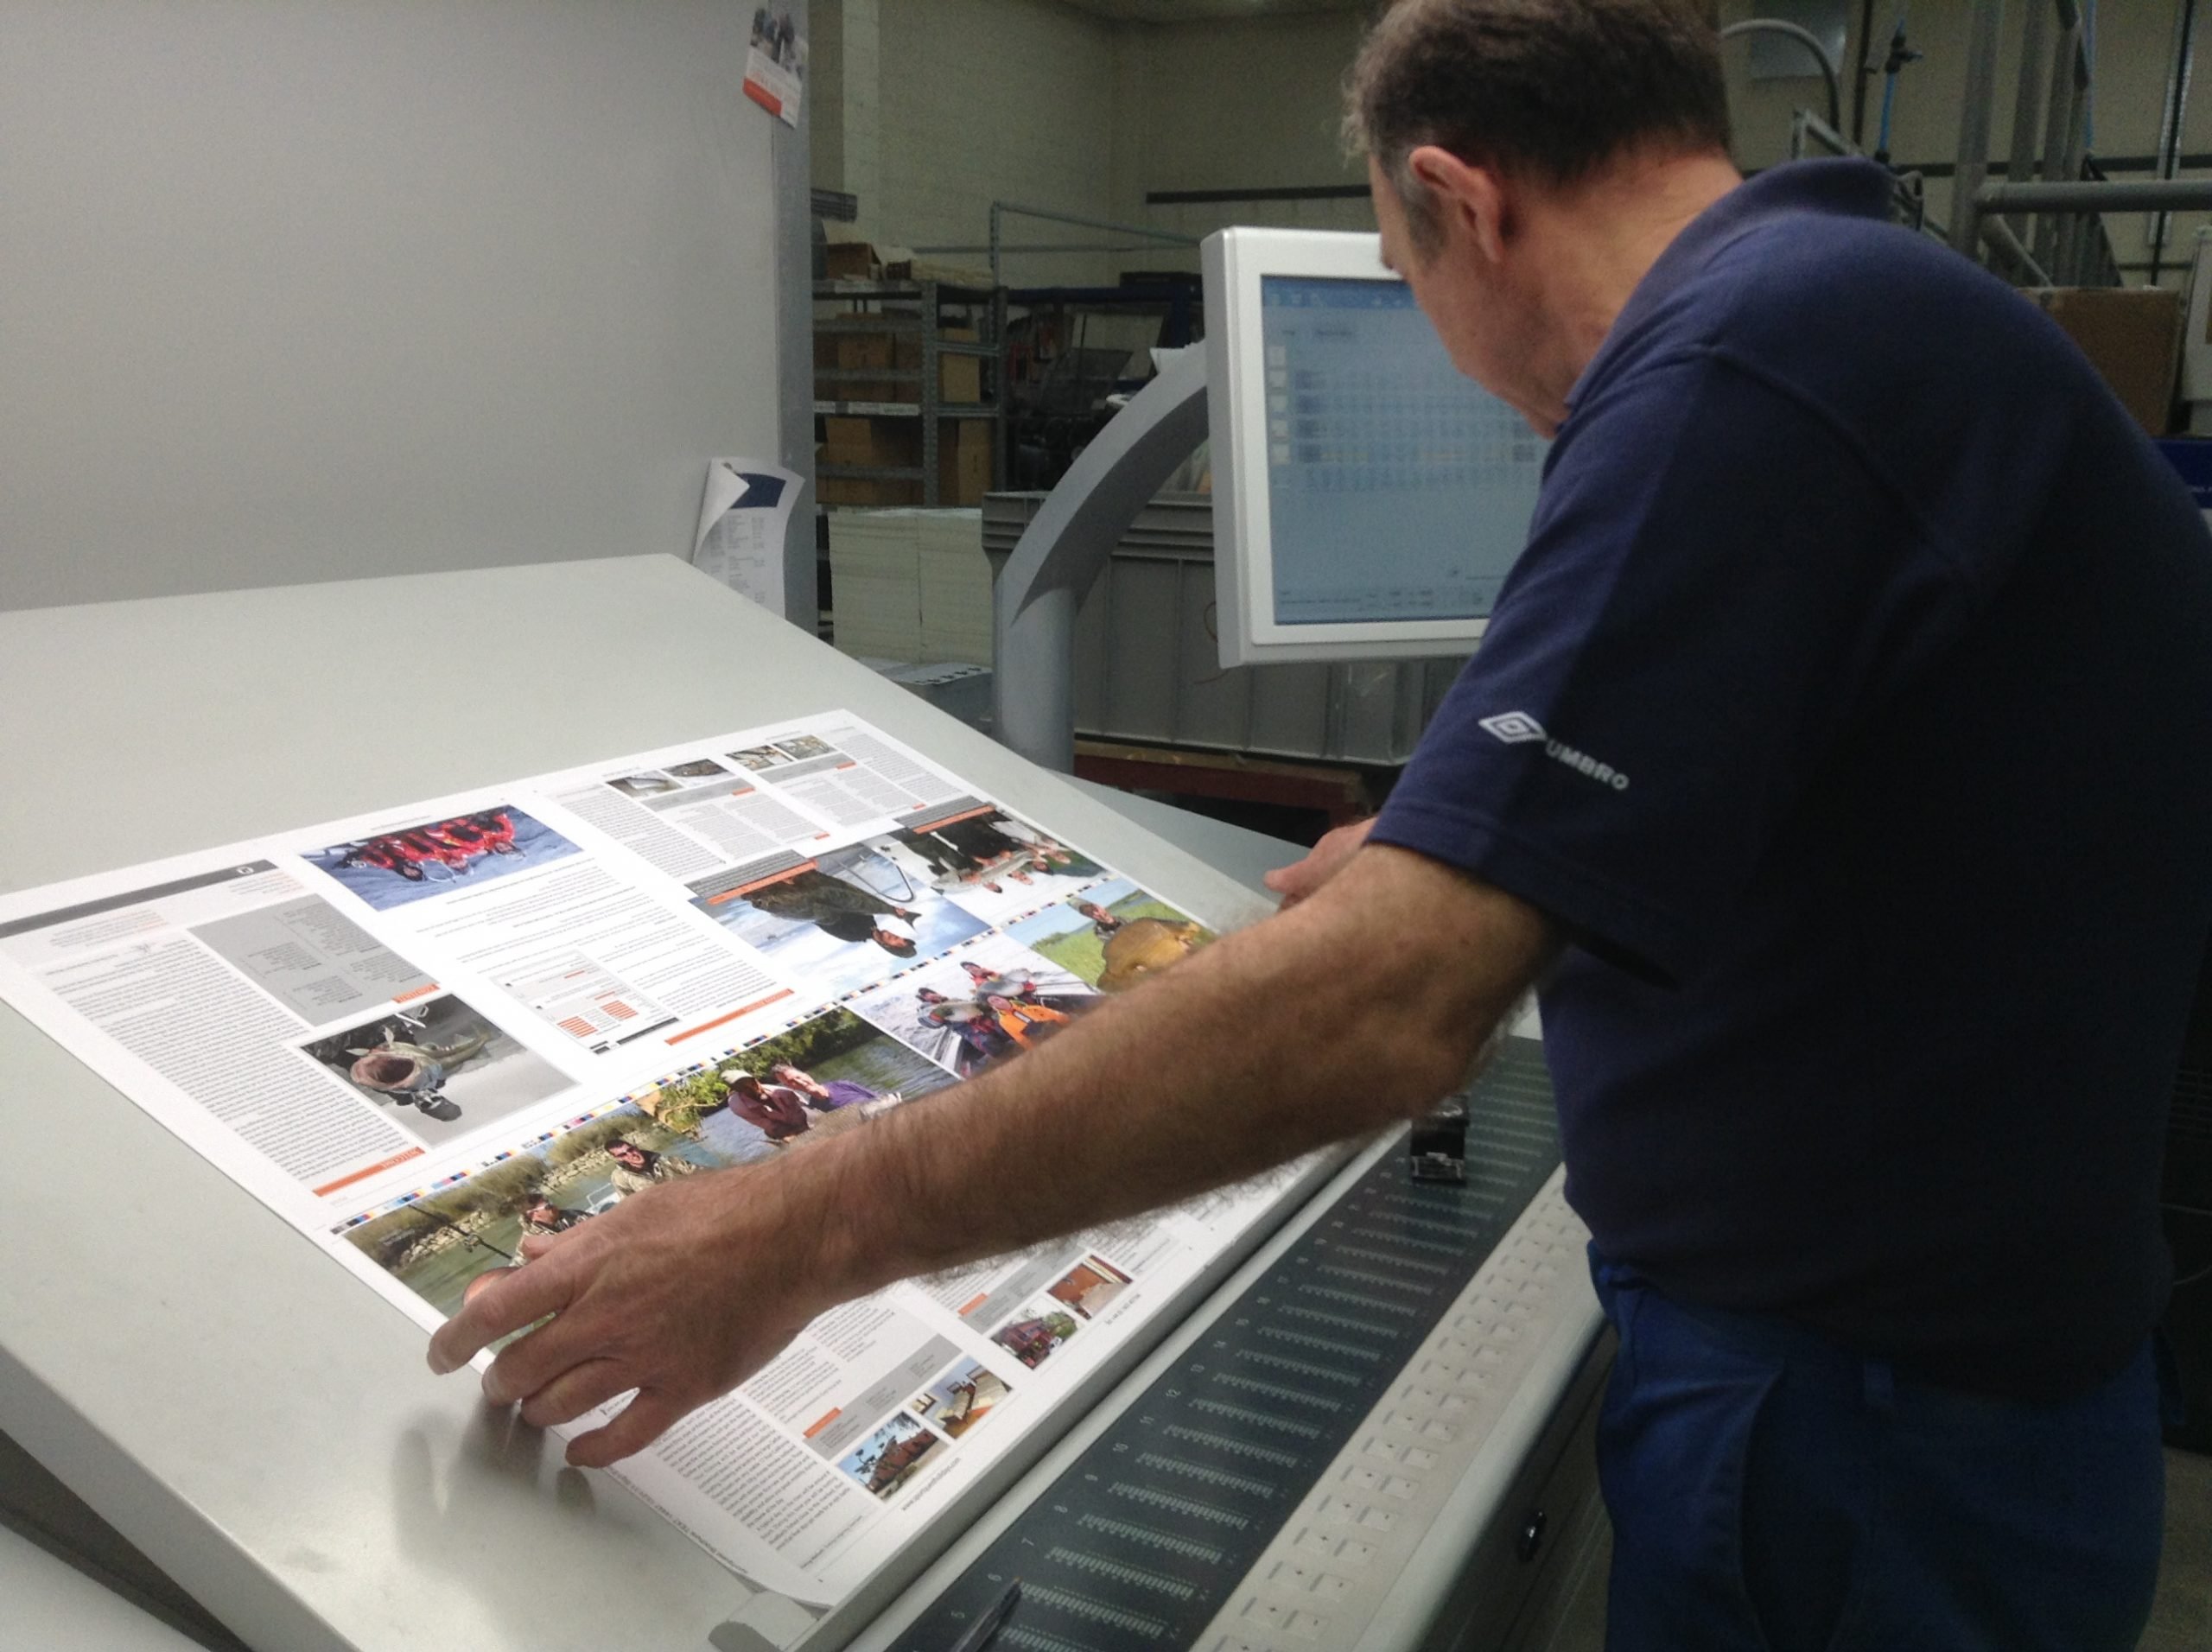 Our Sportquest Brochure being printed